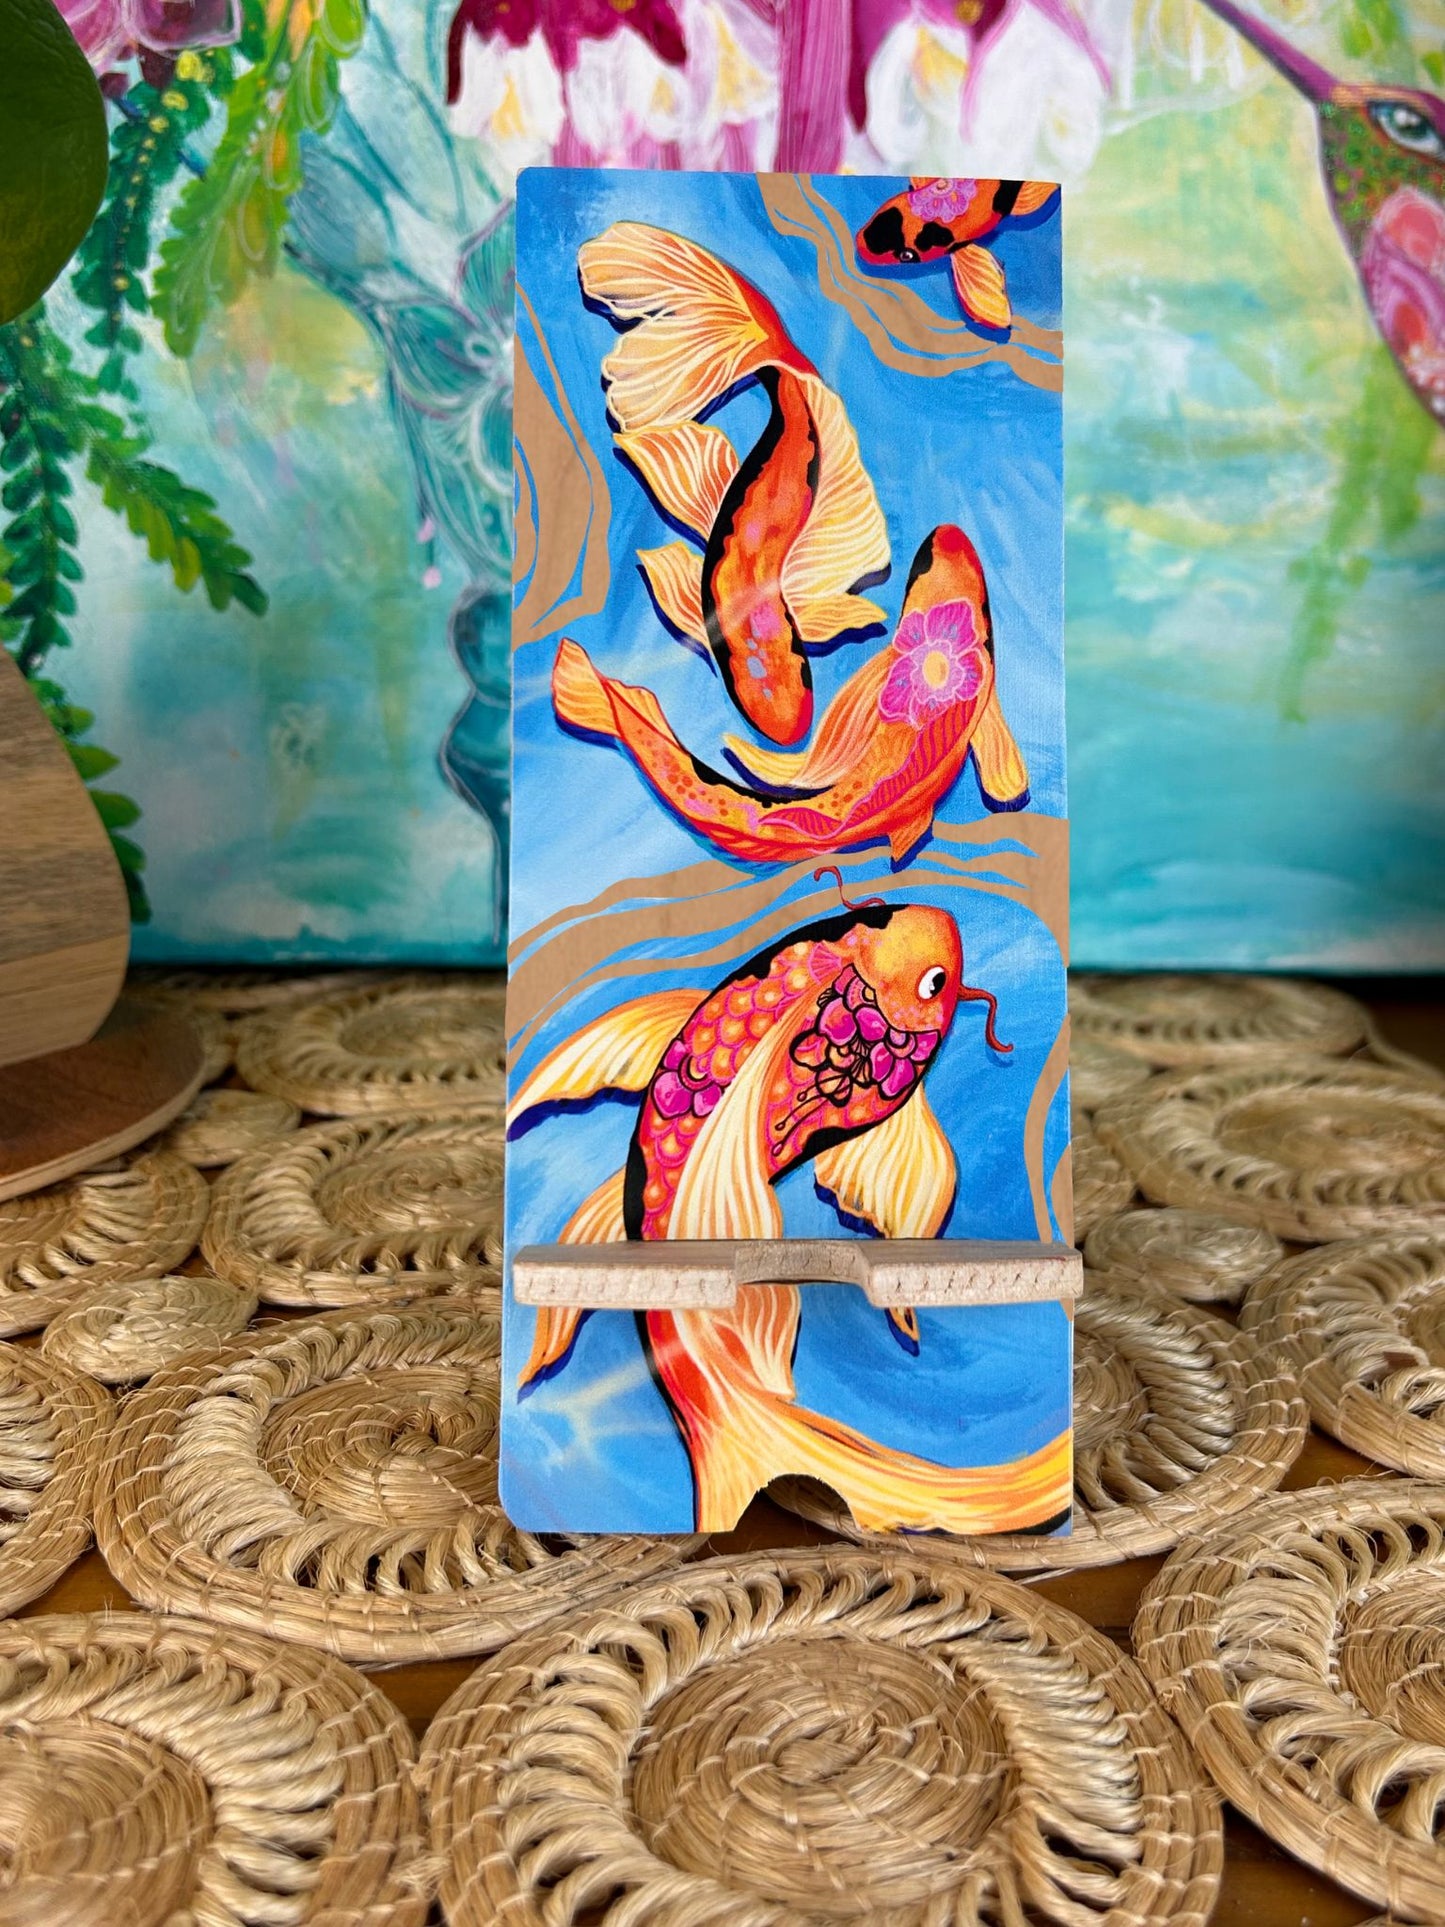 Koi Fish - UV print on a wooden cell phone holder (iPhone Android).